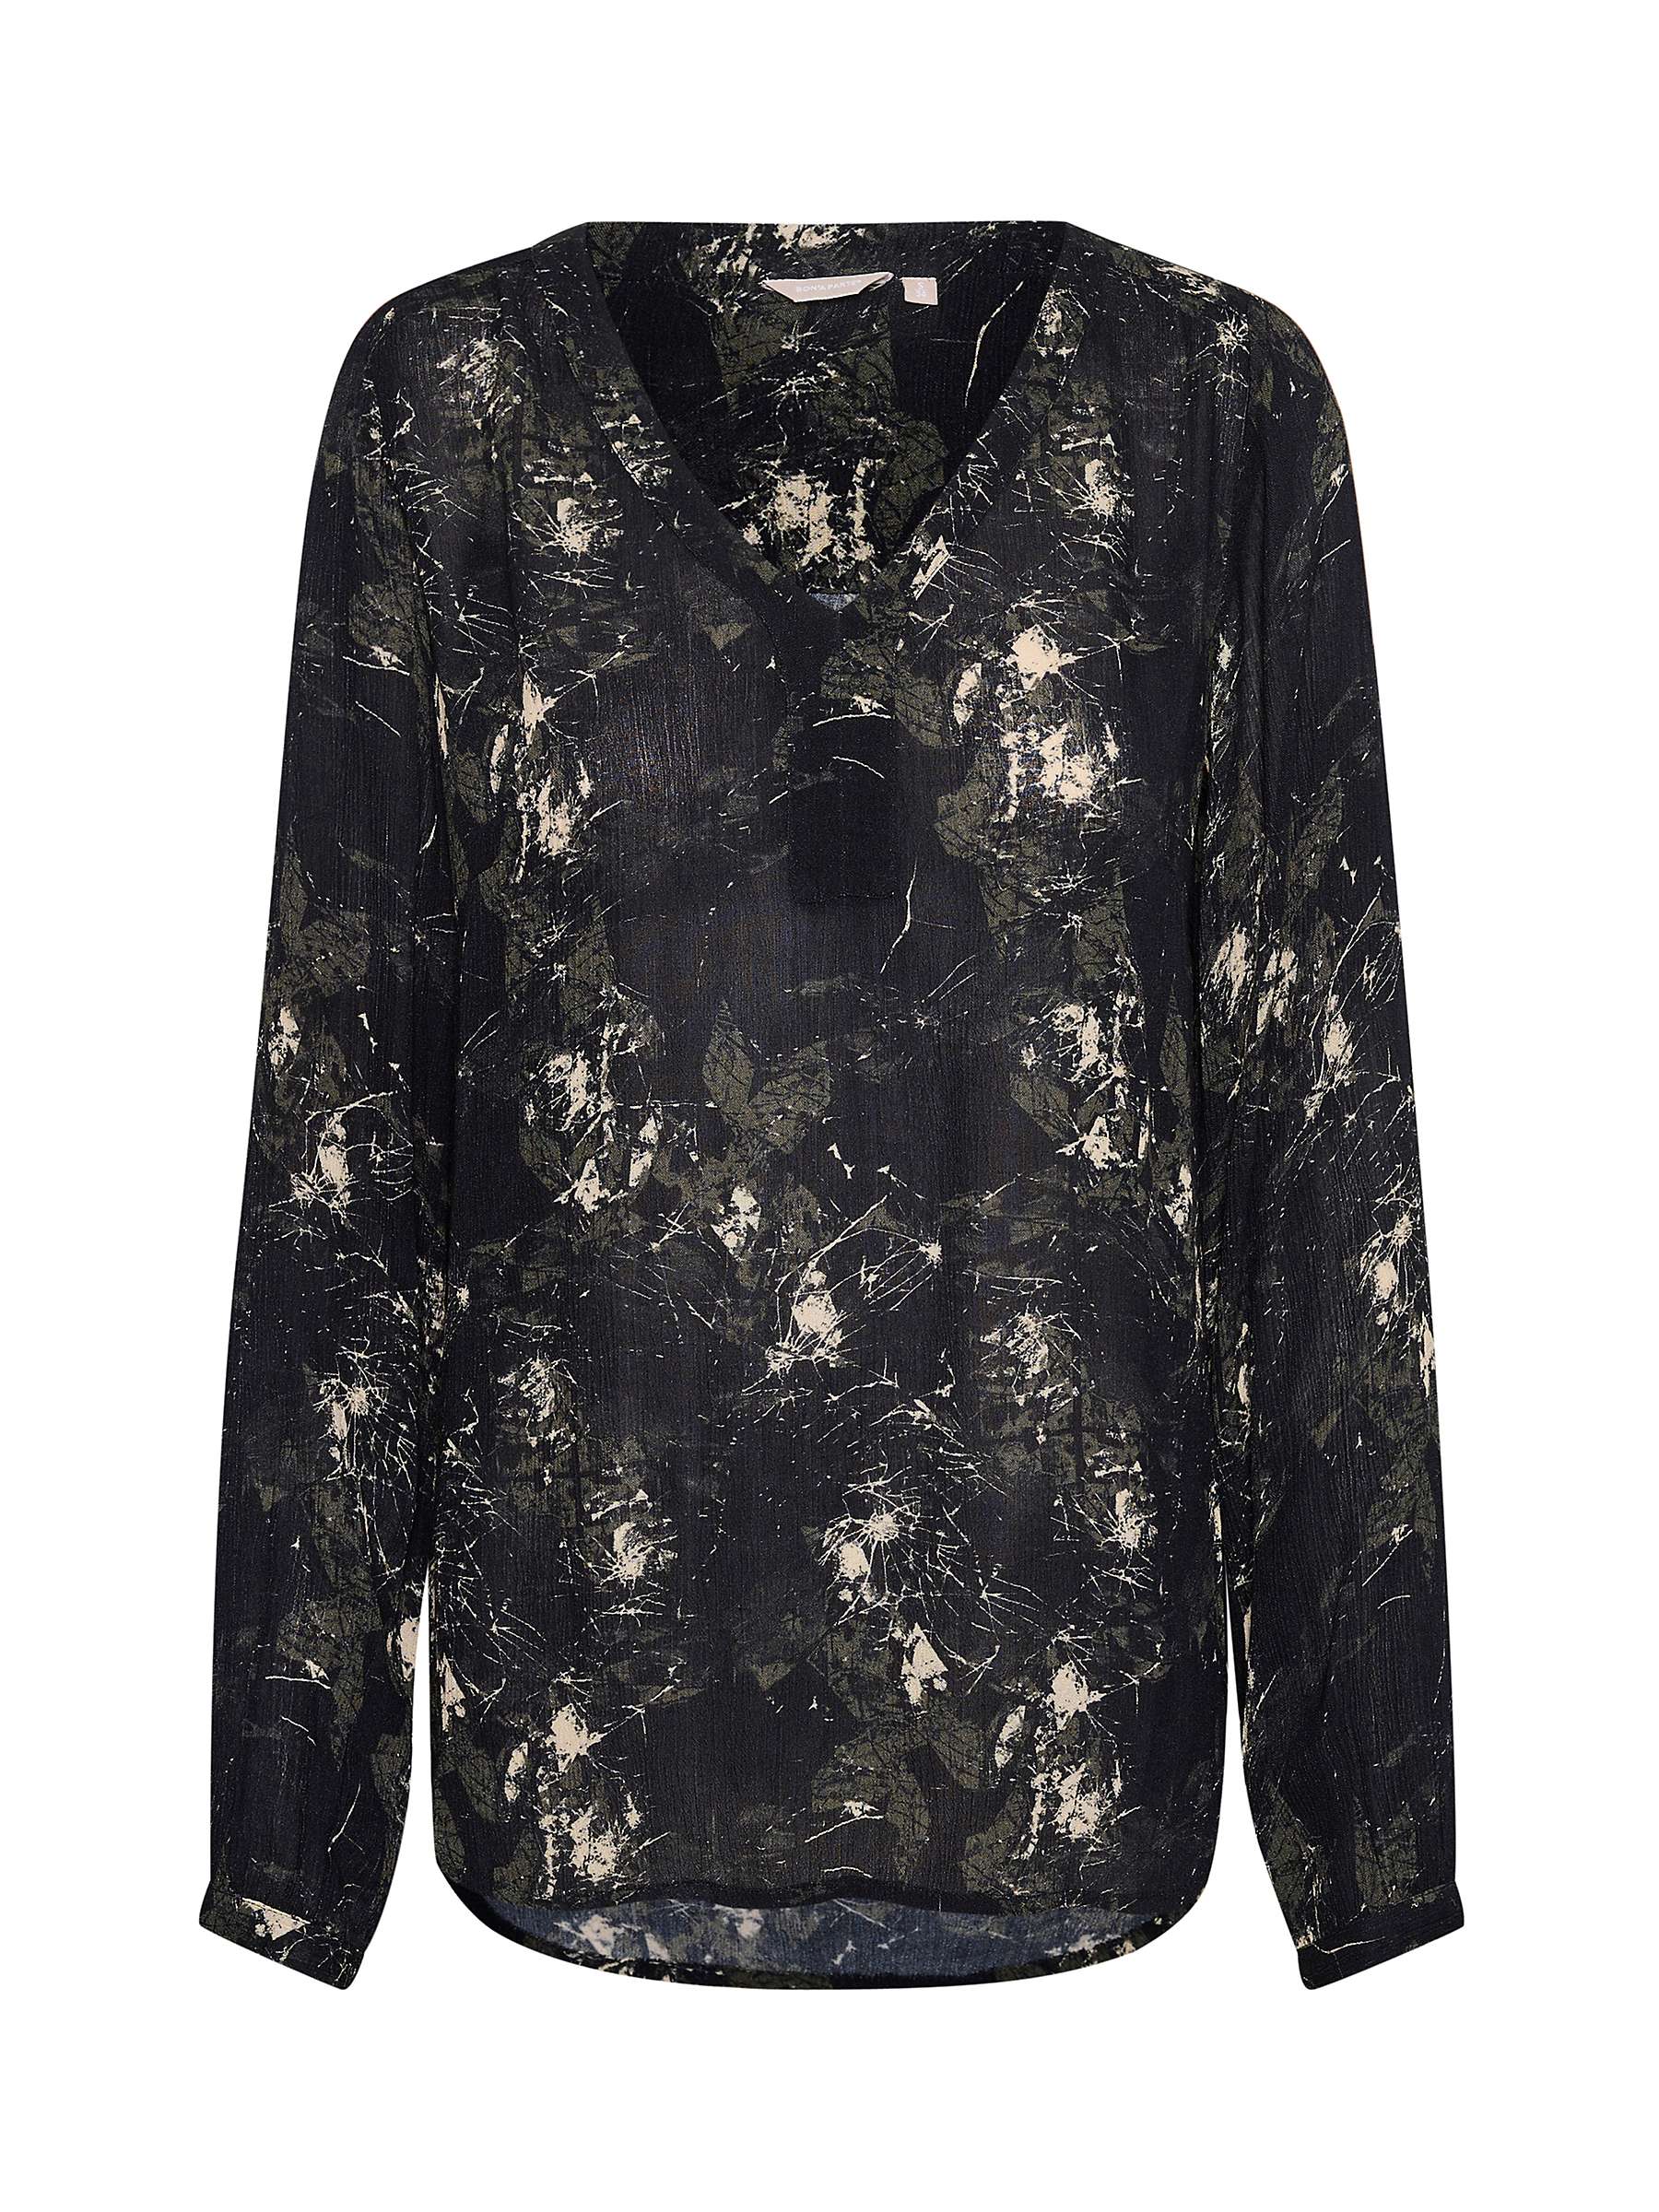 Buy KAFFE Alice Abstract Print Top, Black/Green Online at johnlewis.com